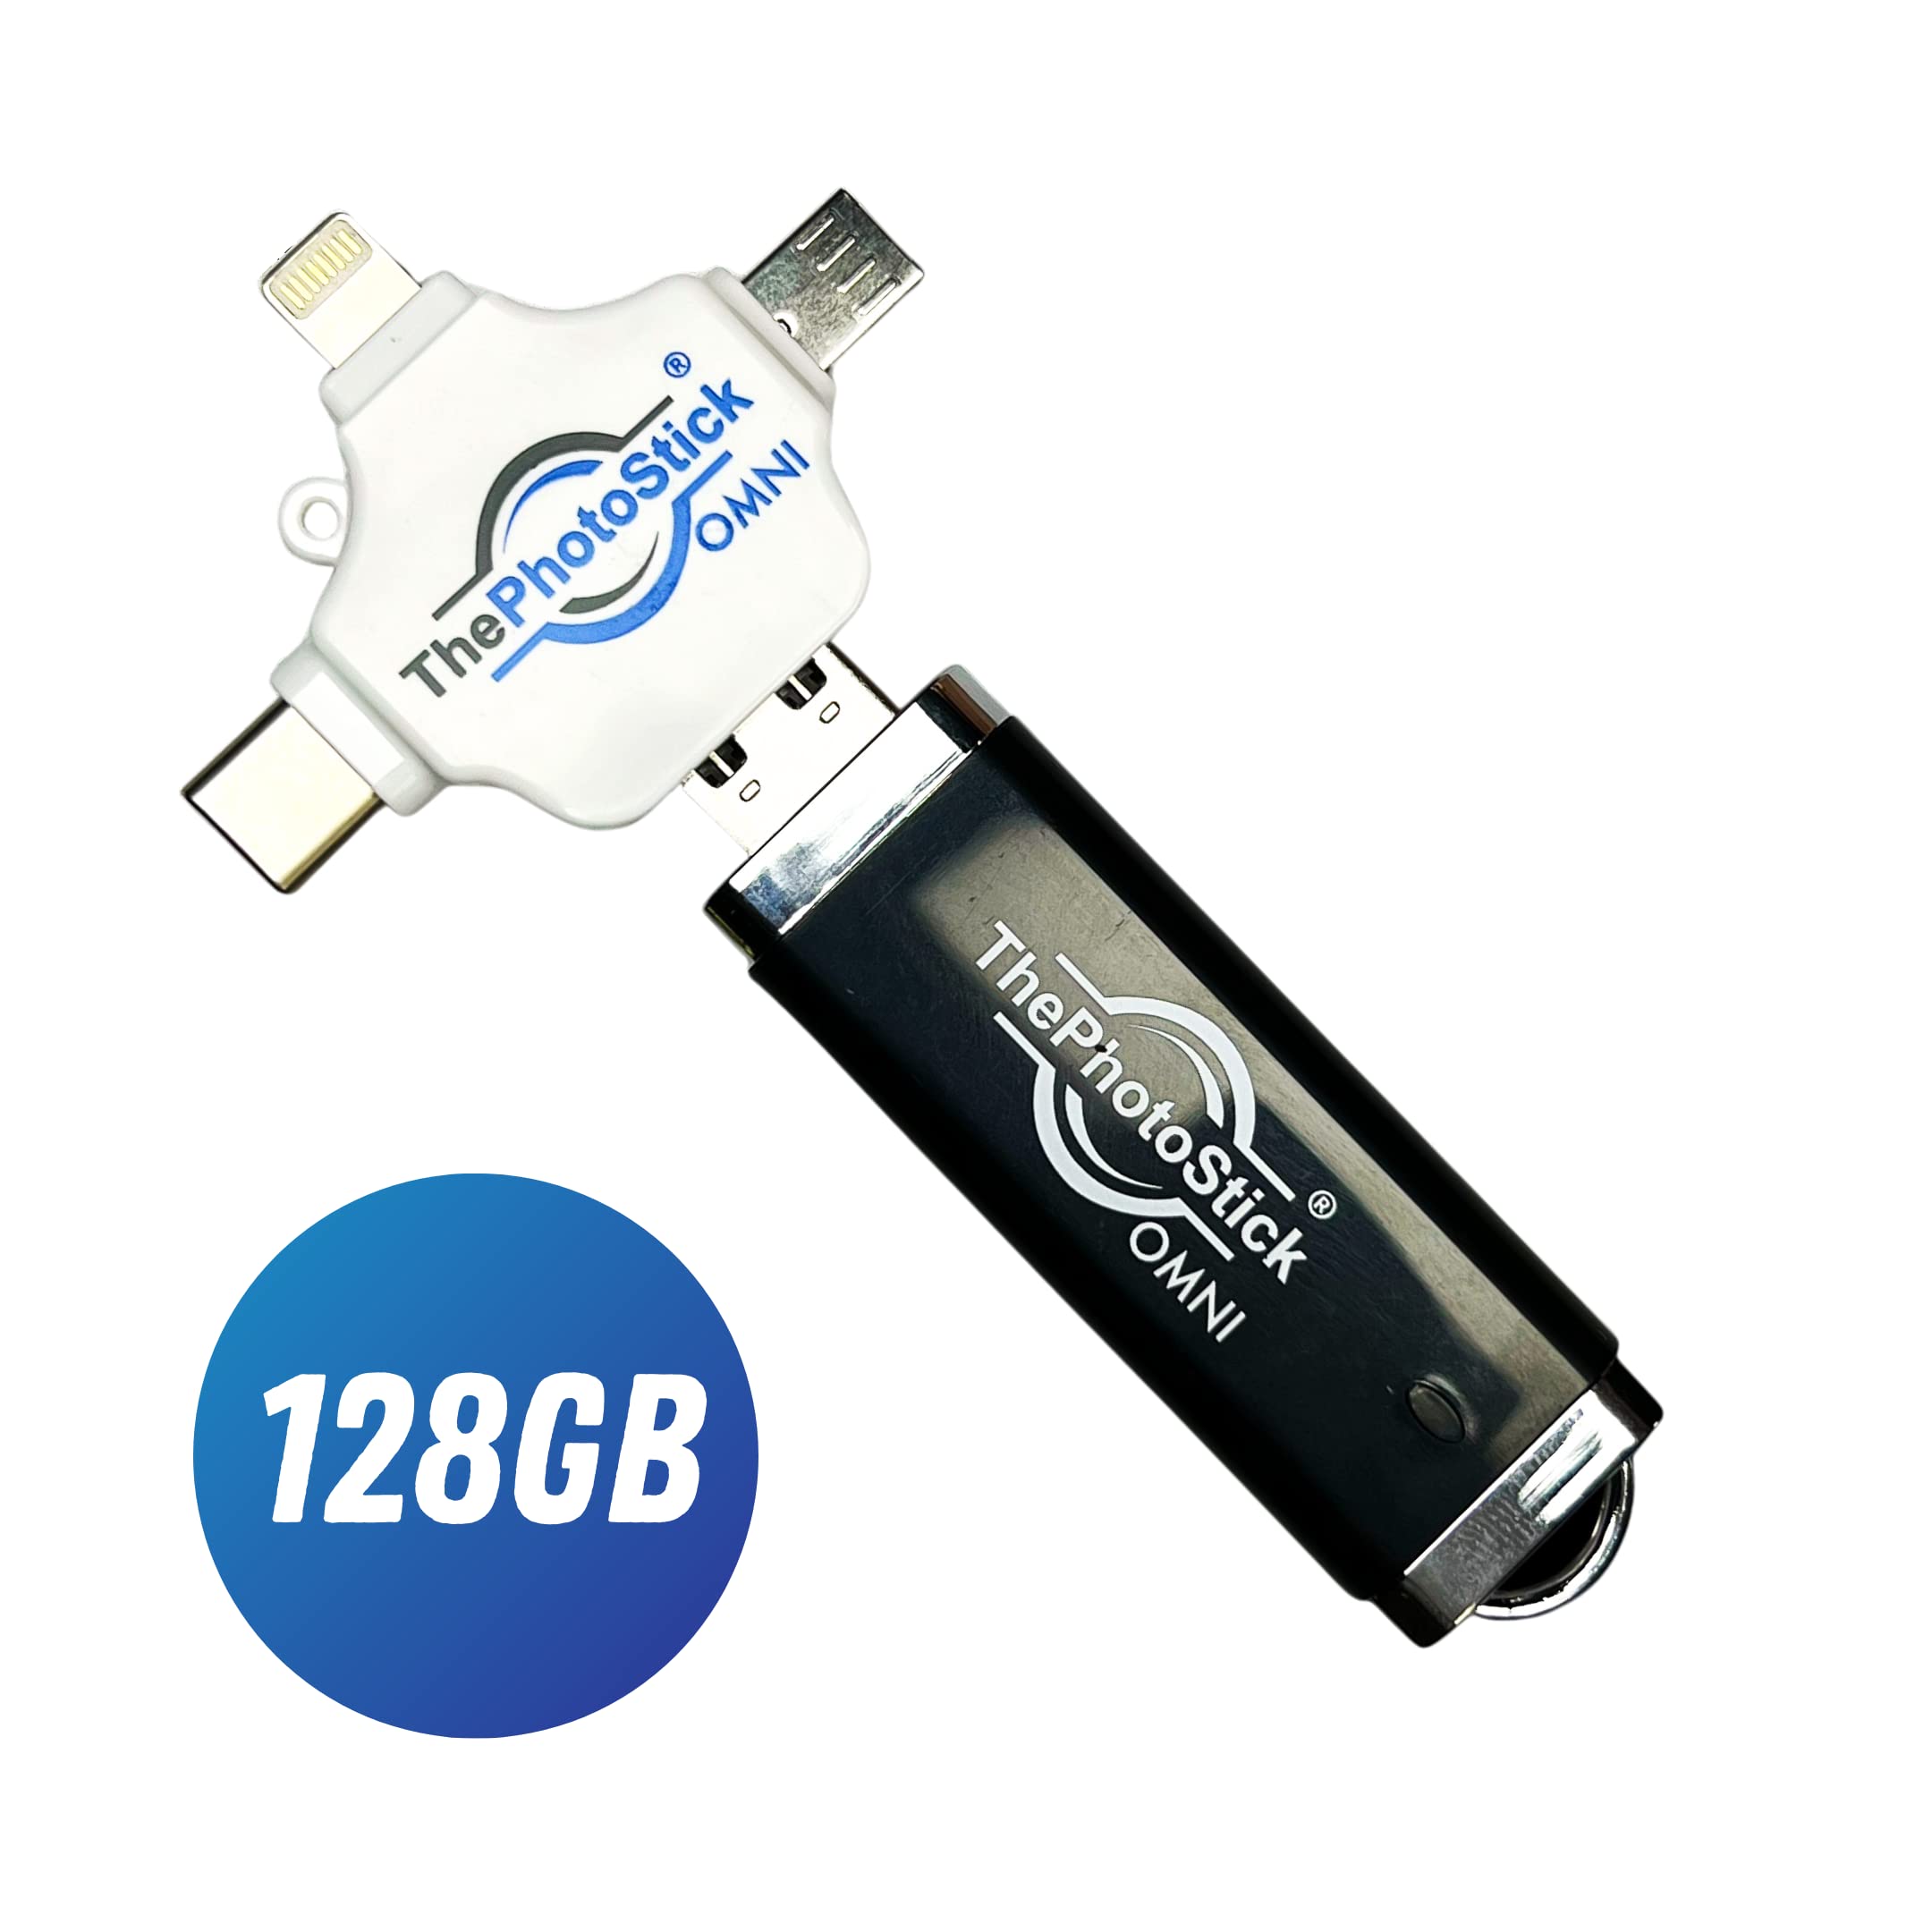 ThePhotoStick Omni 128GB - usb Effortless Photo and Video Backup for Apple, Android and Windows Devices, Computers